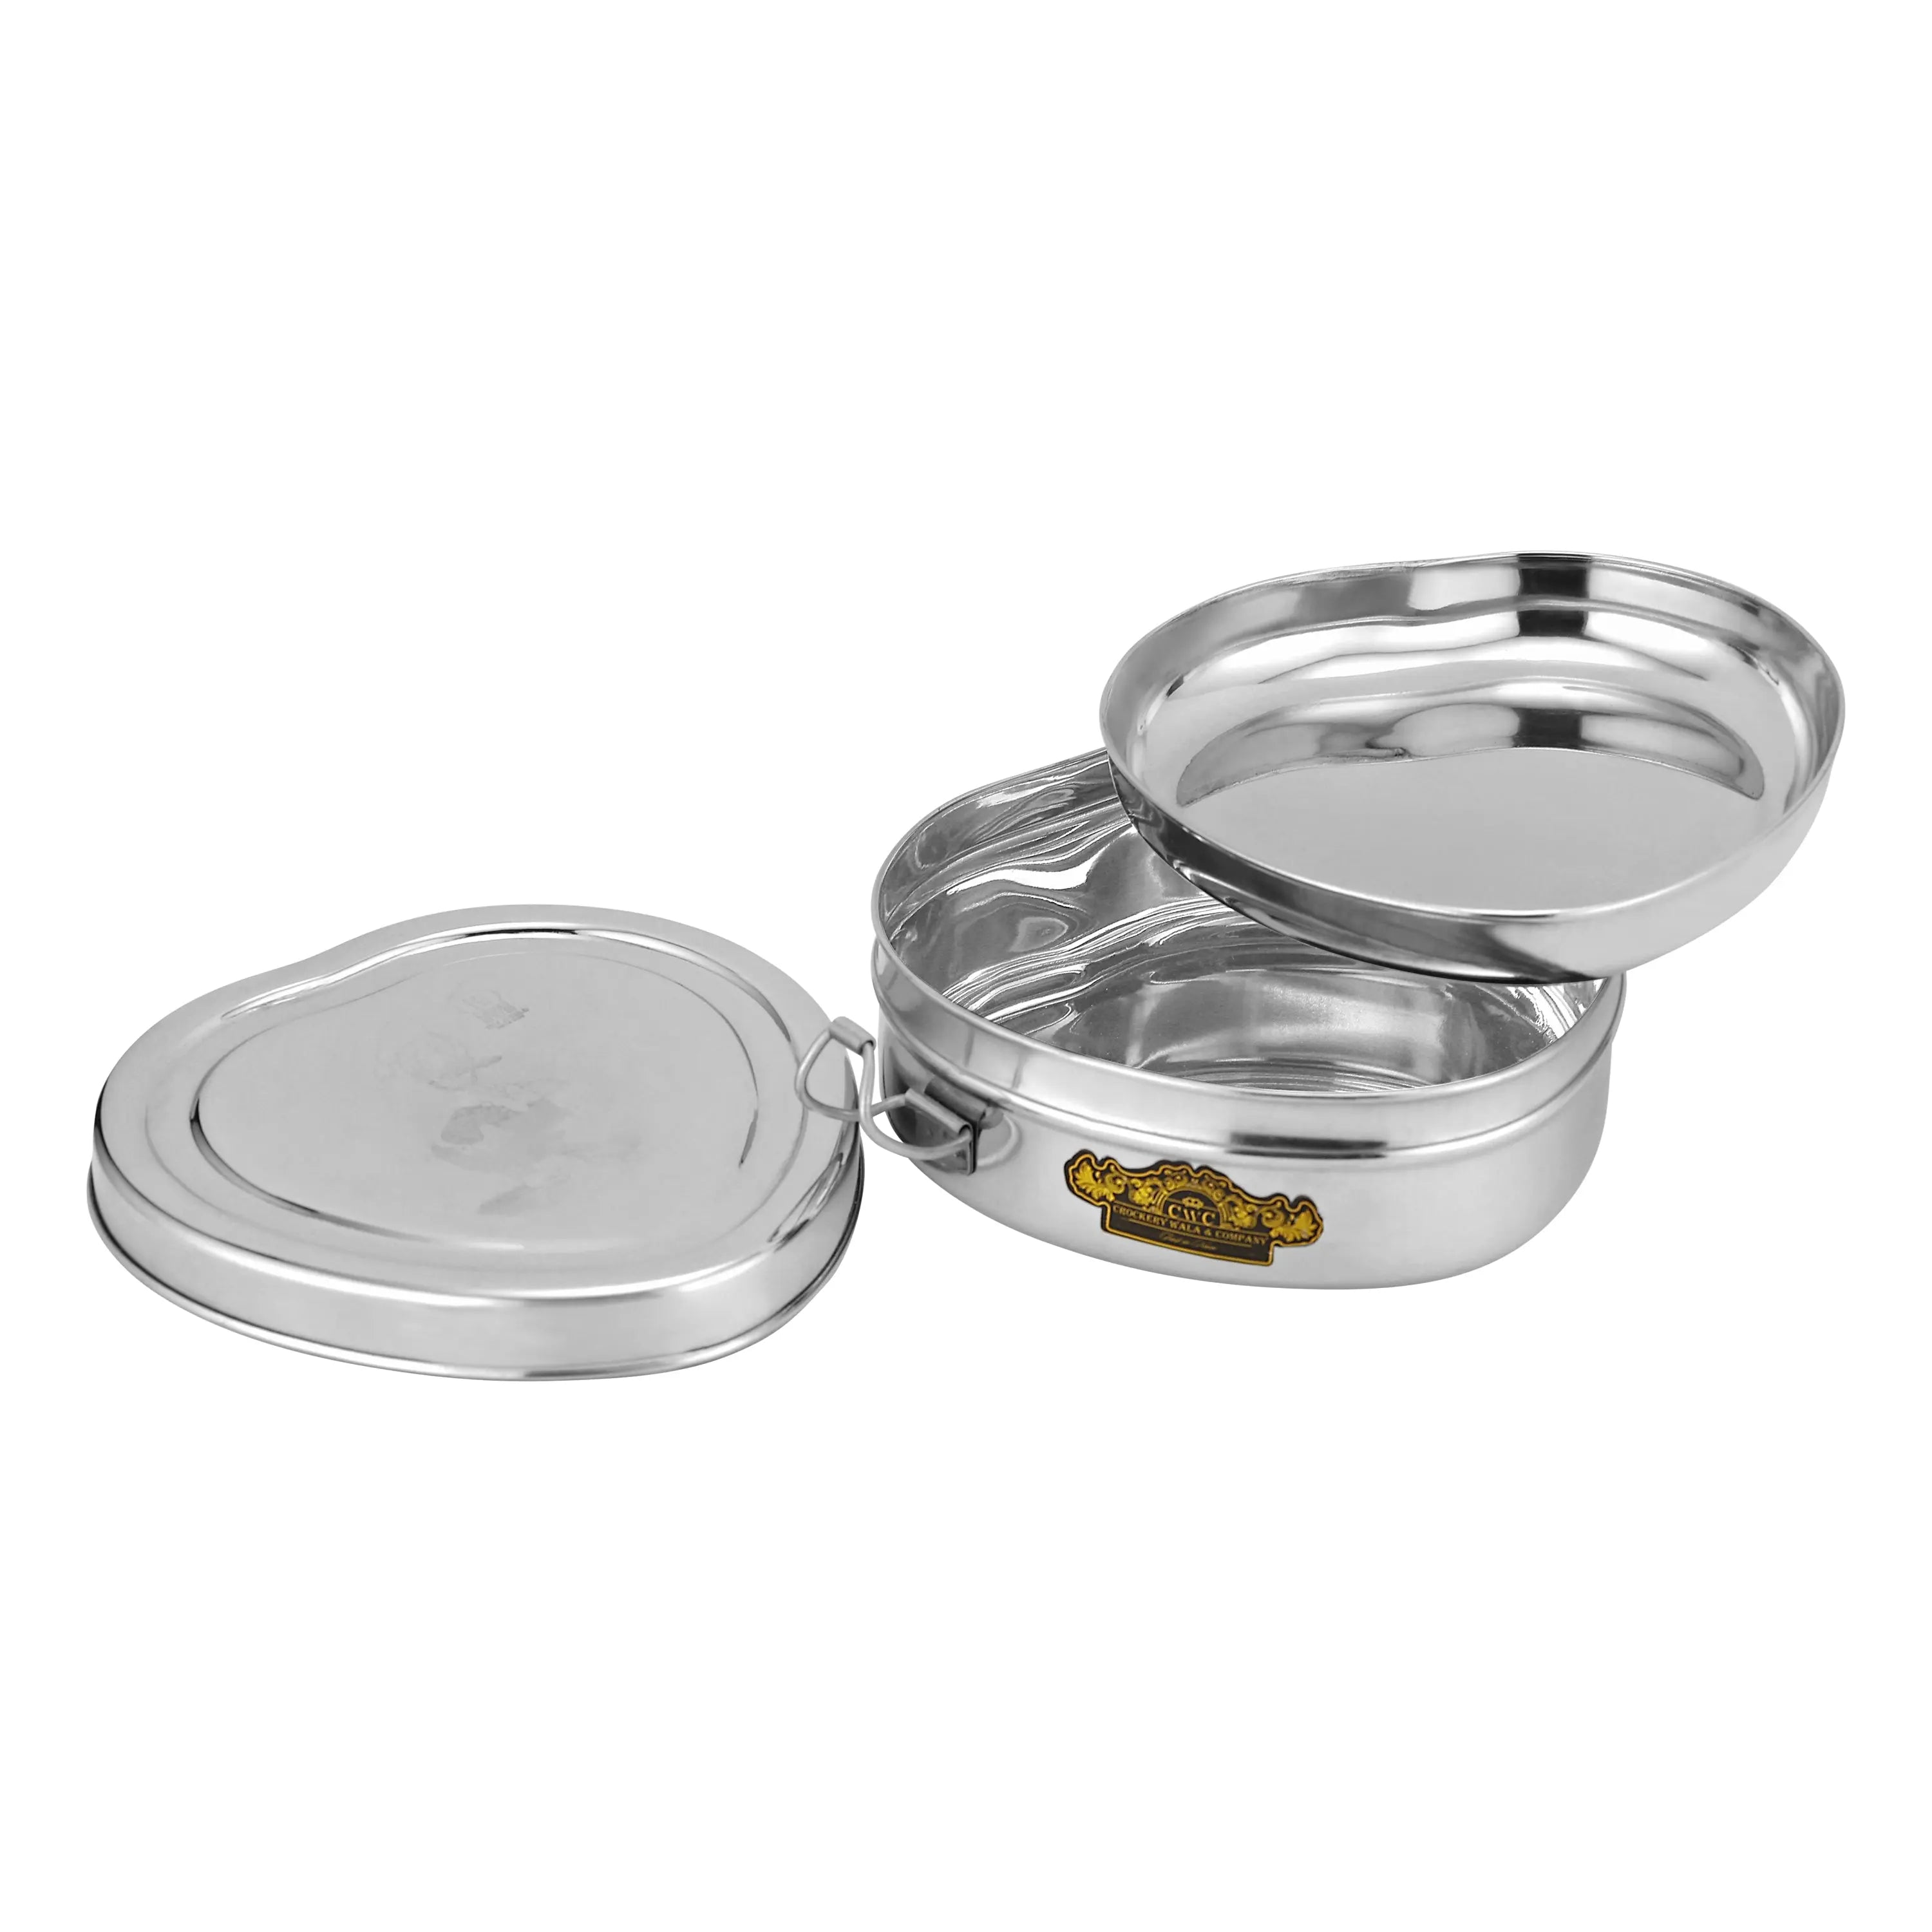 STAINLESS STEEL VALENTINE LUNCH BOX - CROCKERY WALA AND COMPANY 